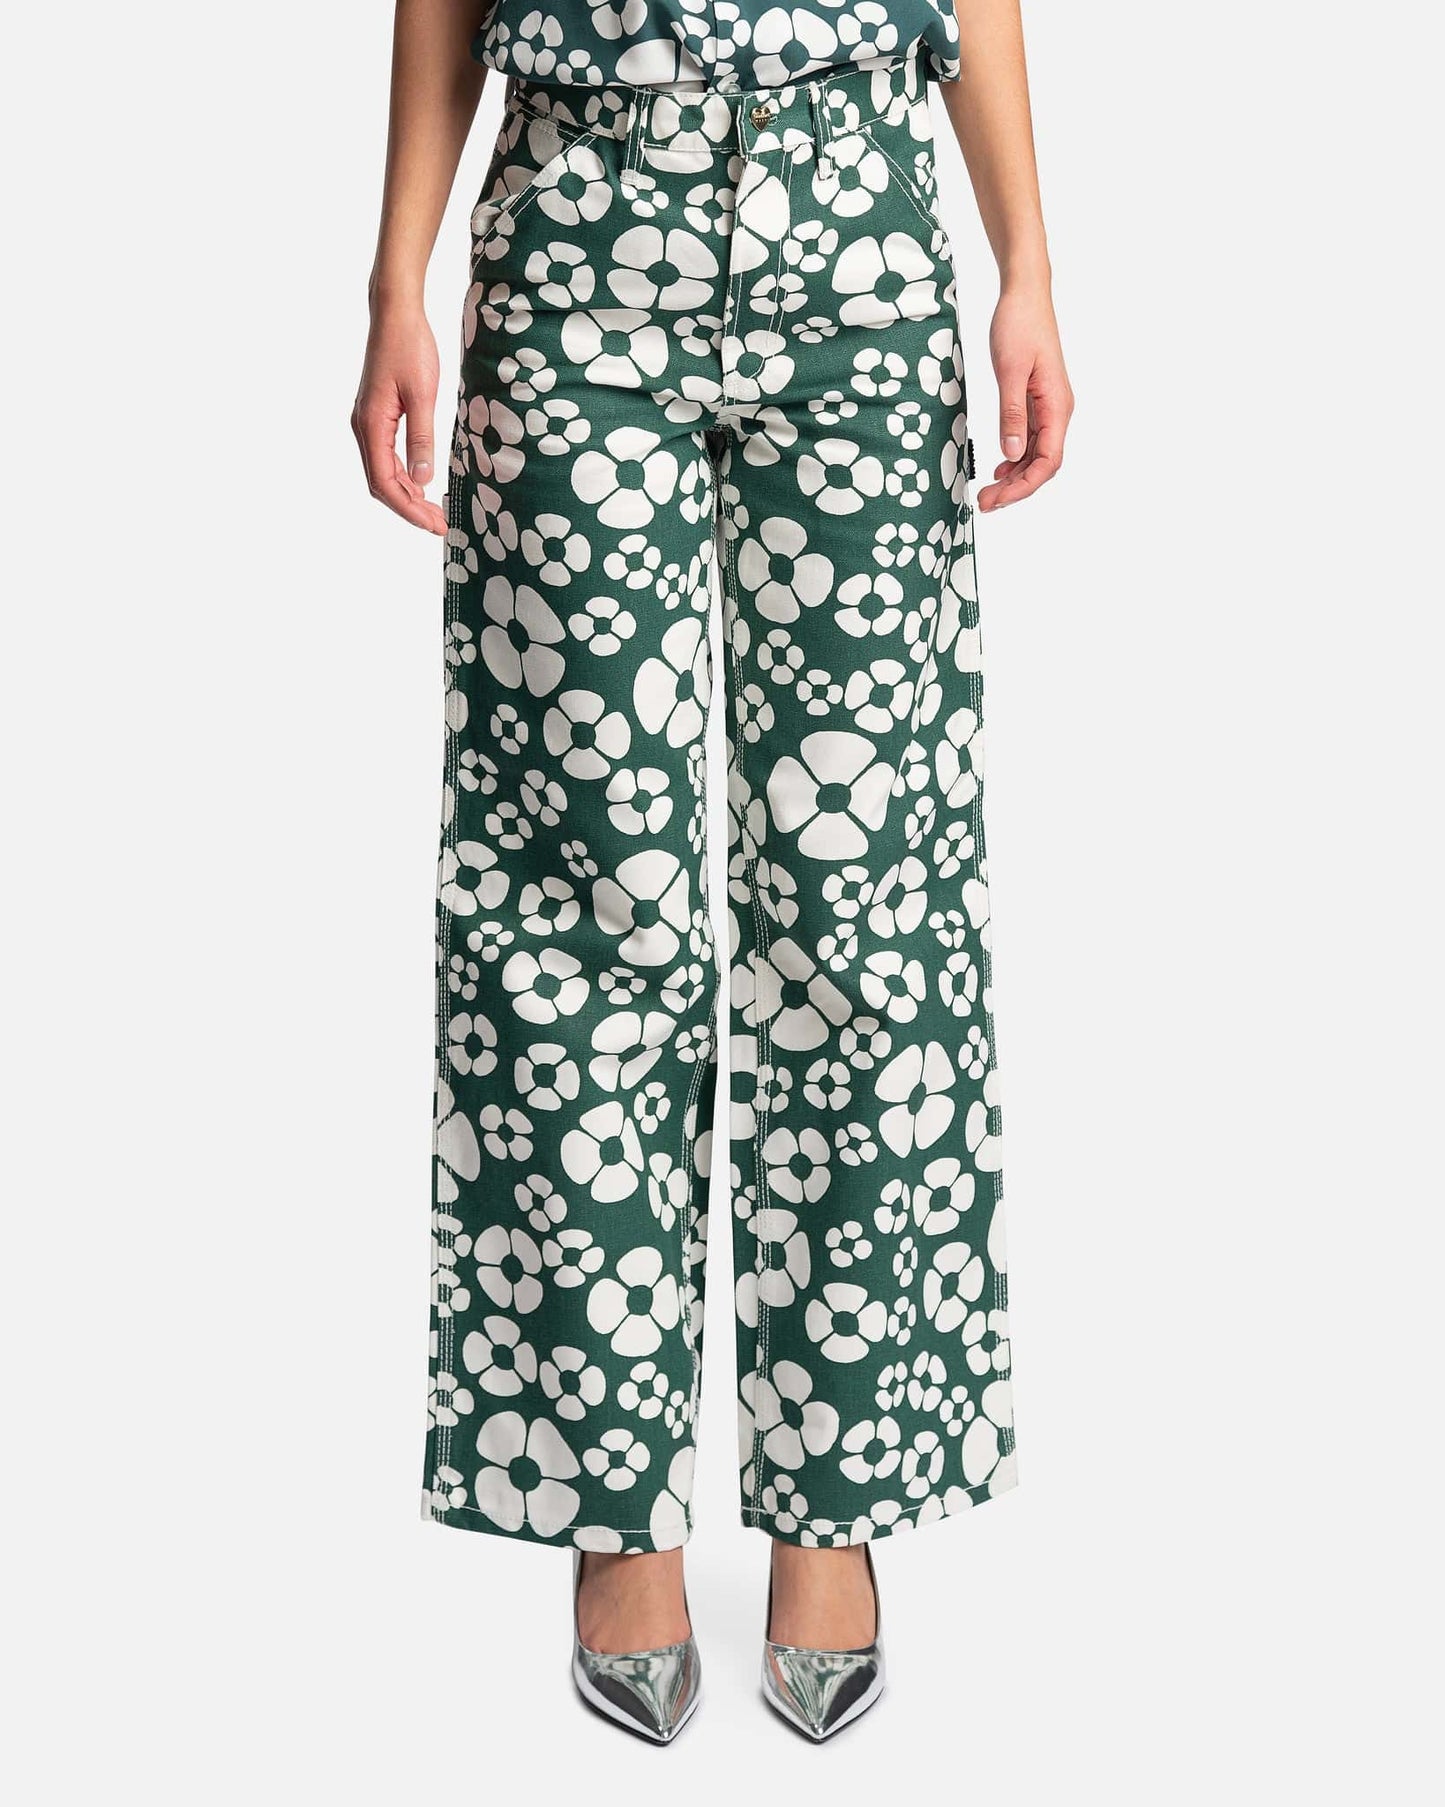 Marni Women Pants Carhartt Flower Print Cotton Canvas Trousers in Forest Green